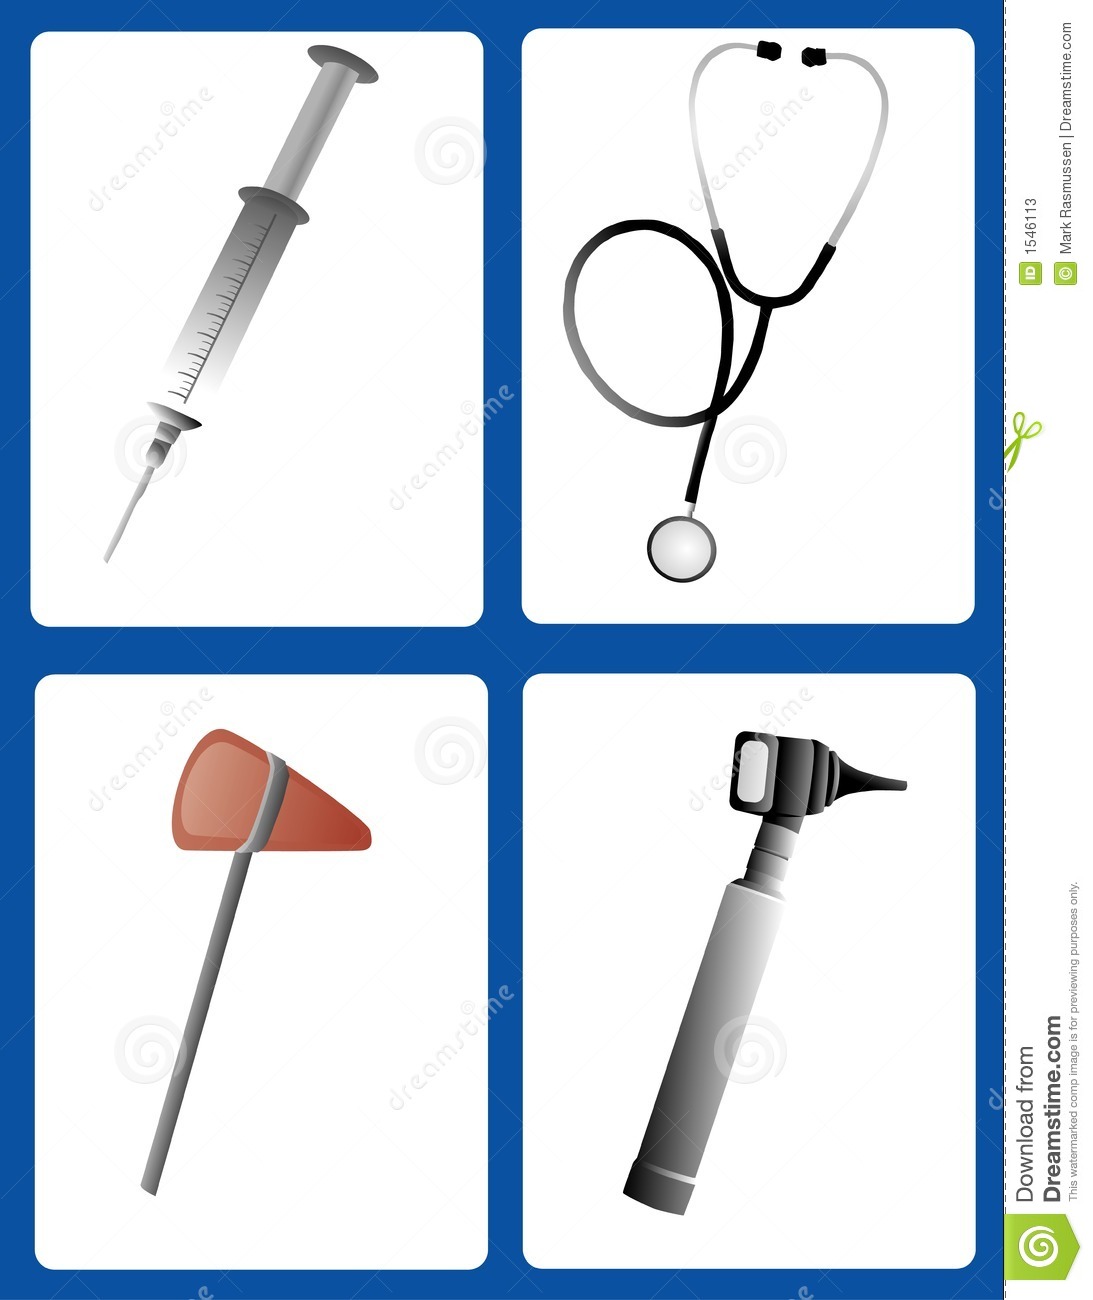 of various doctors tools, | Clipart Panda - Free Clipart Images